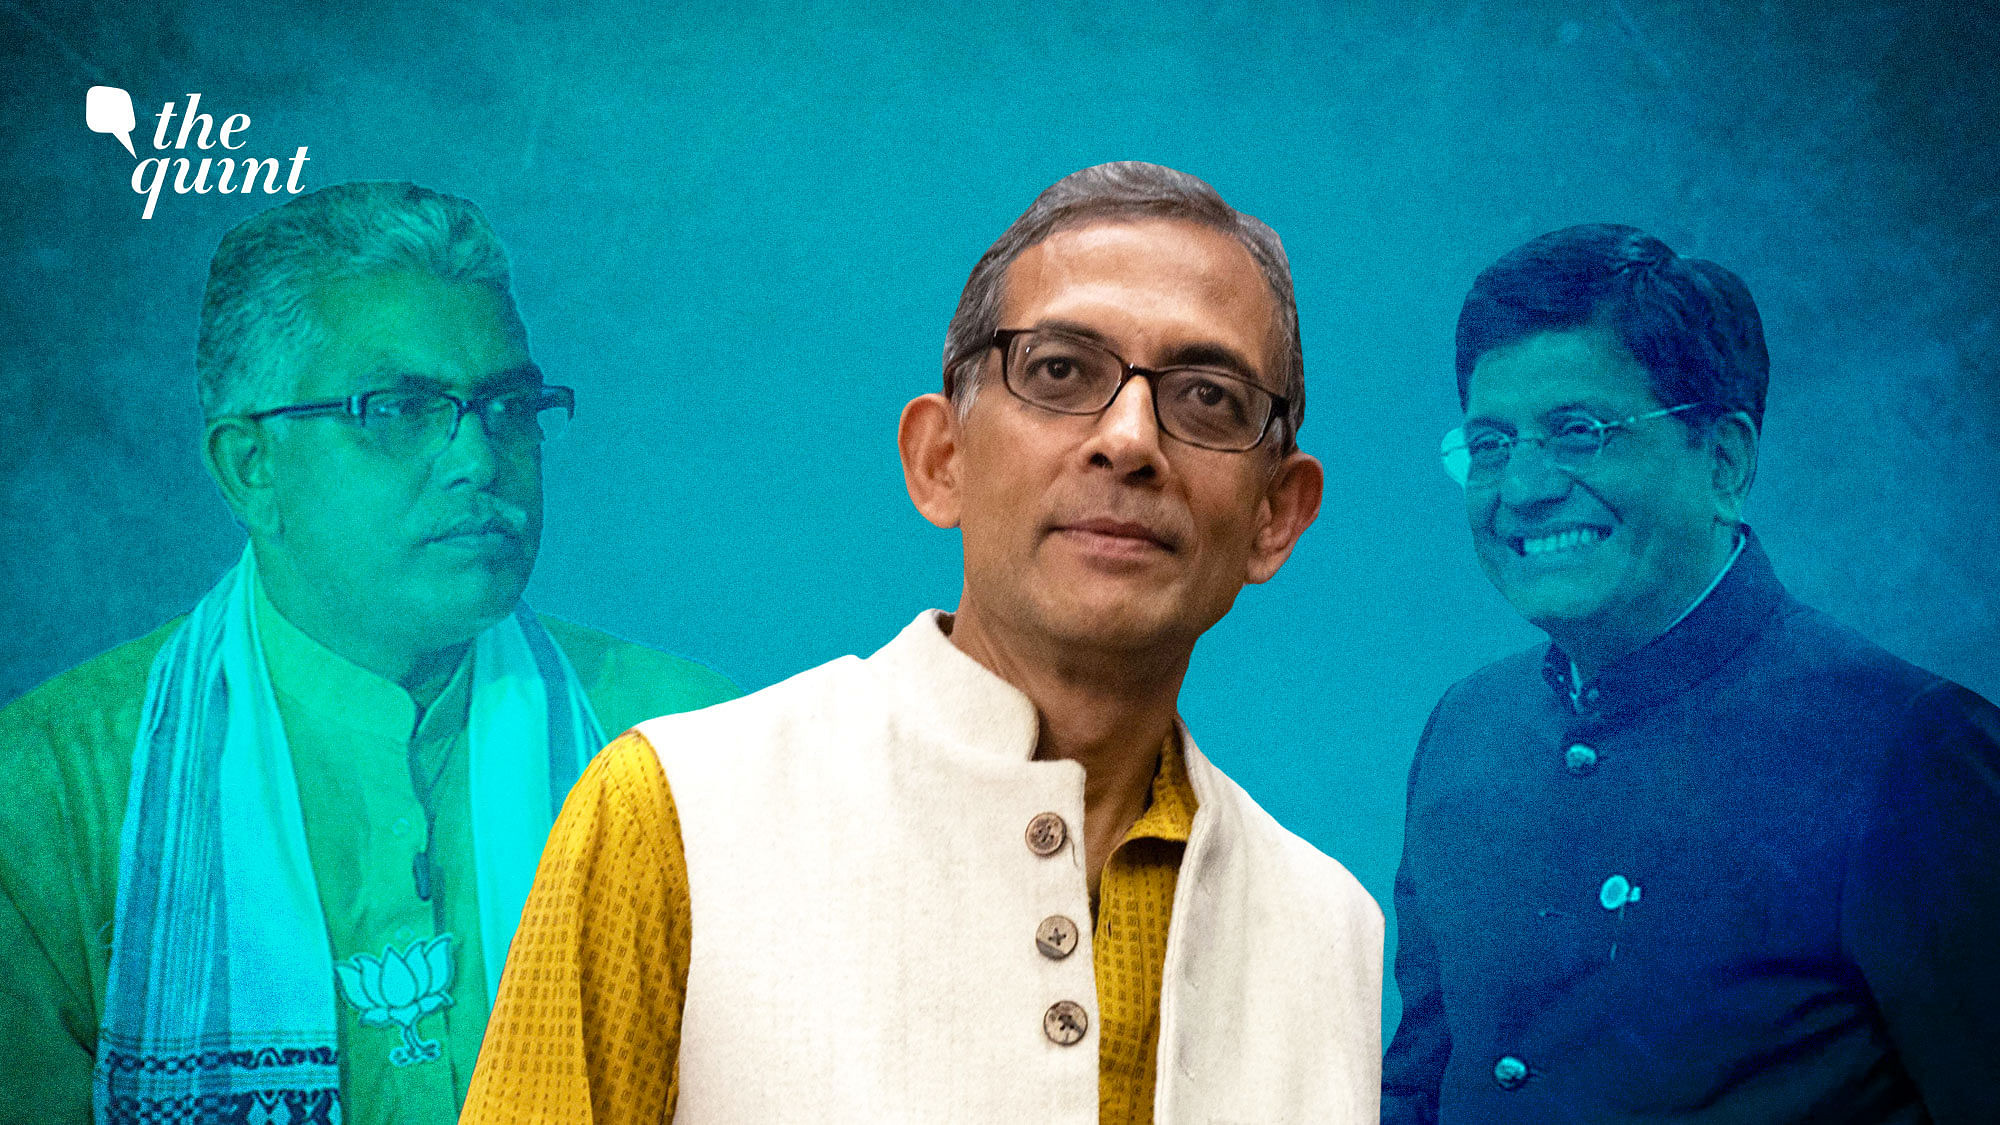 While the central leadership of the BJP keeps coming out in criticism of Nobel Laureate Abhijit Banerjee since his win, the West Bengal state unit of the party has found itself in a fix.